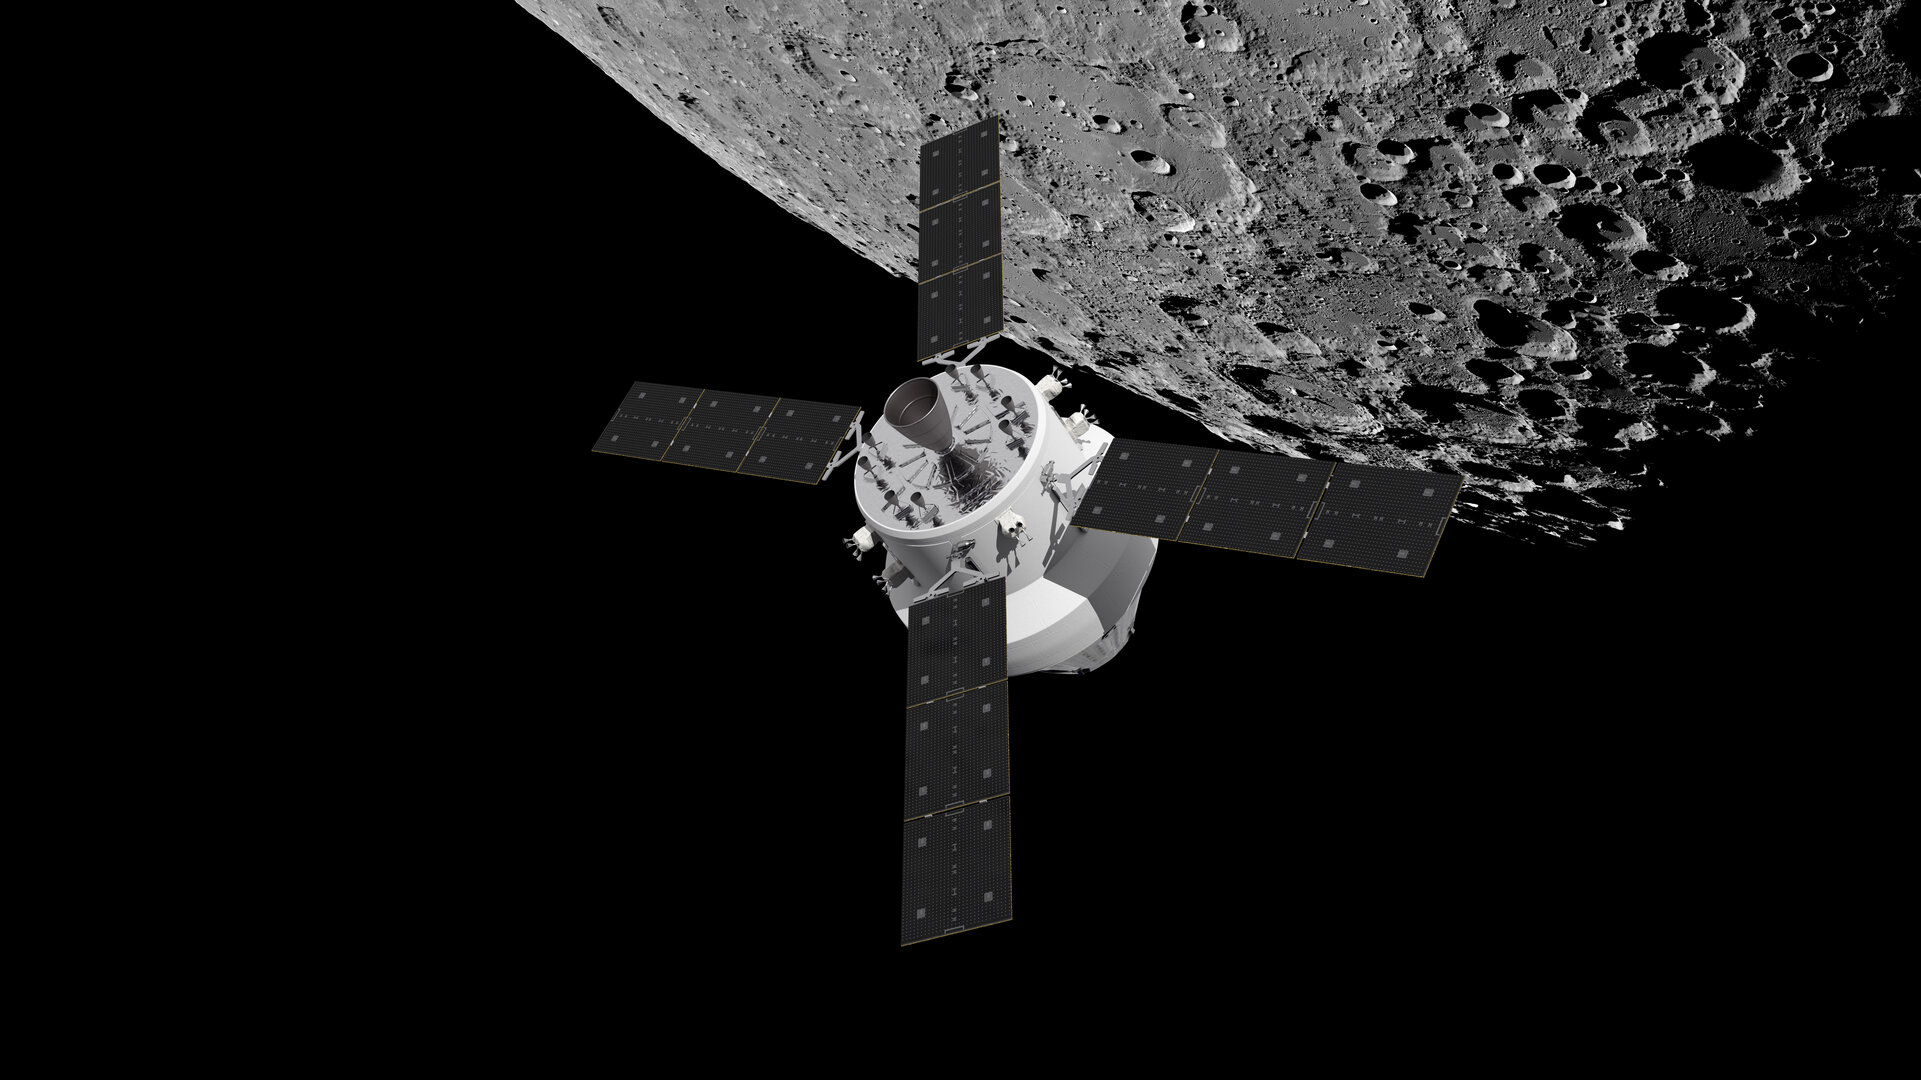 Orion and European Service Module over the Moon